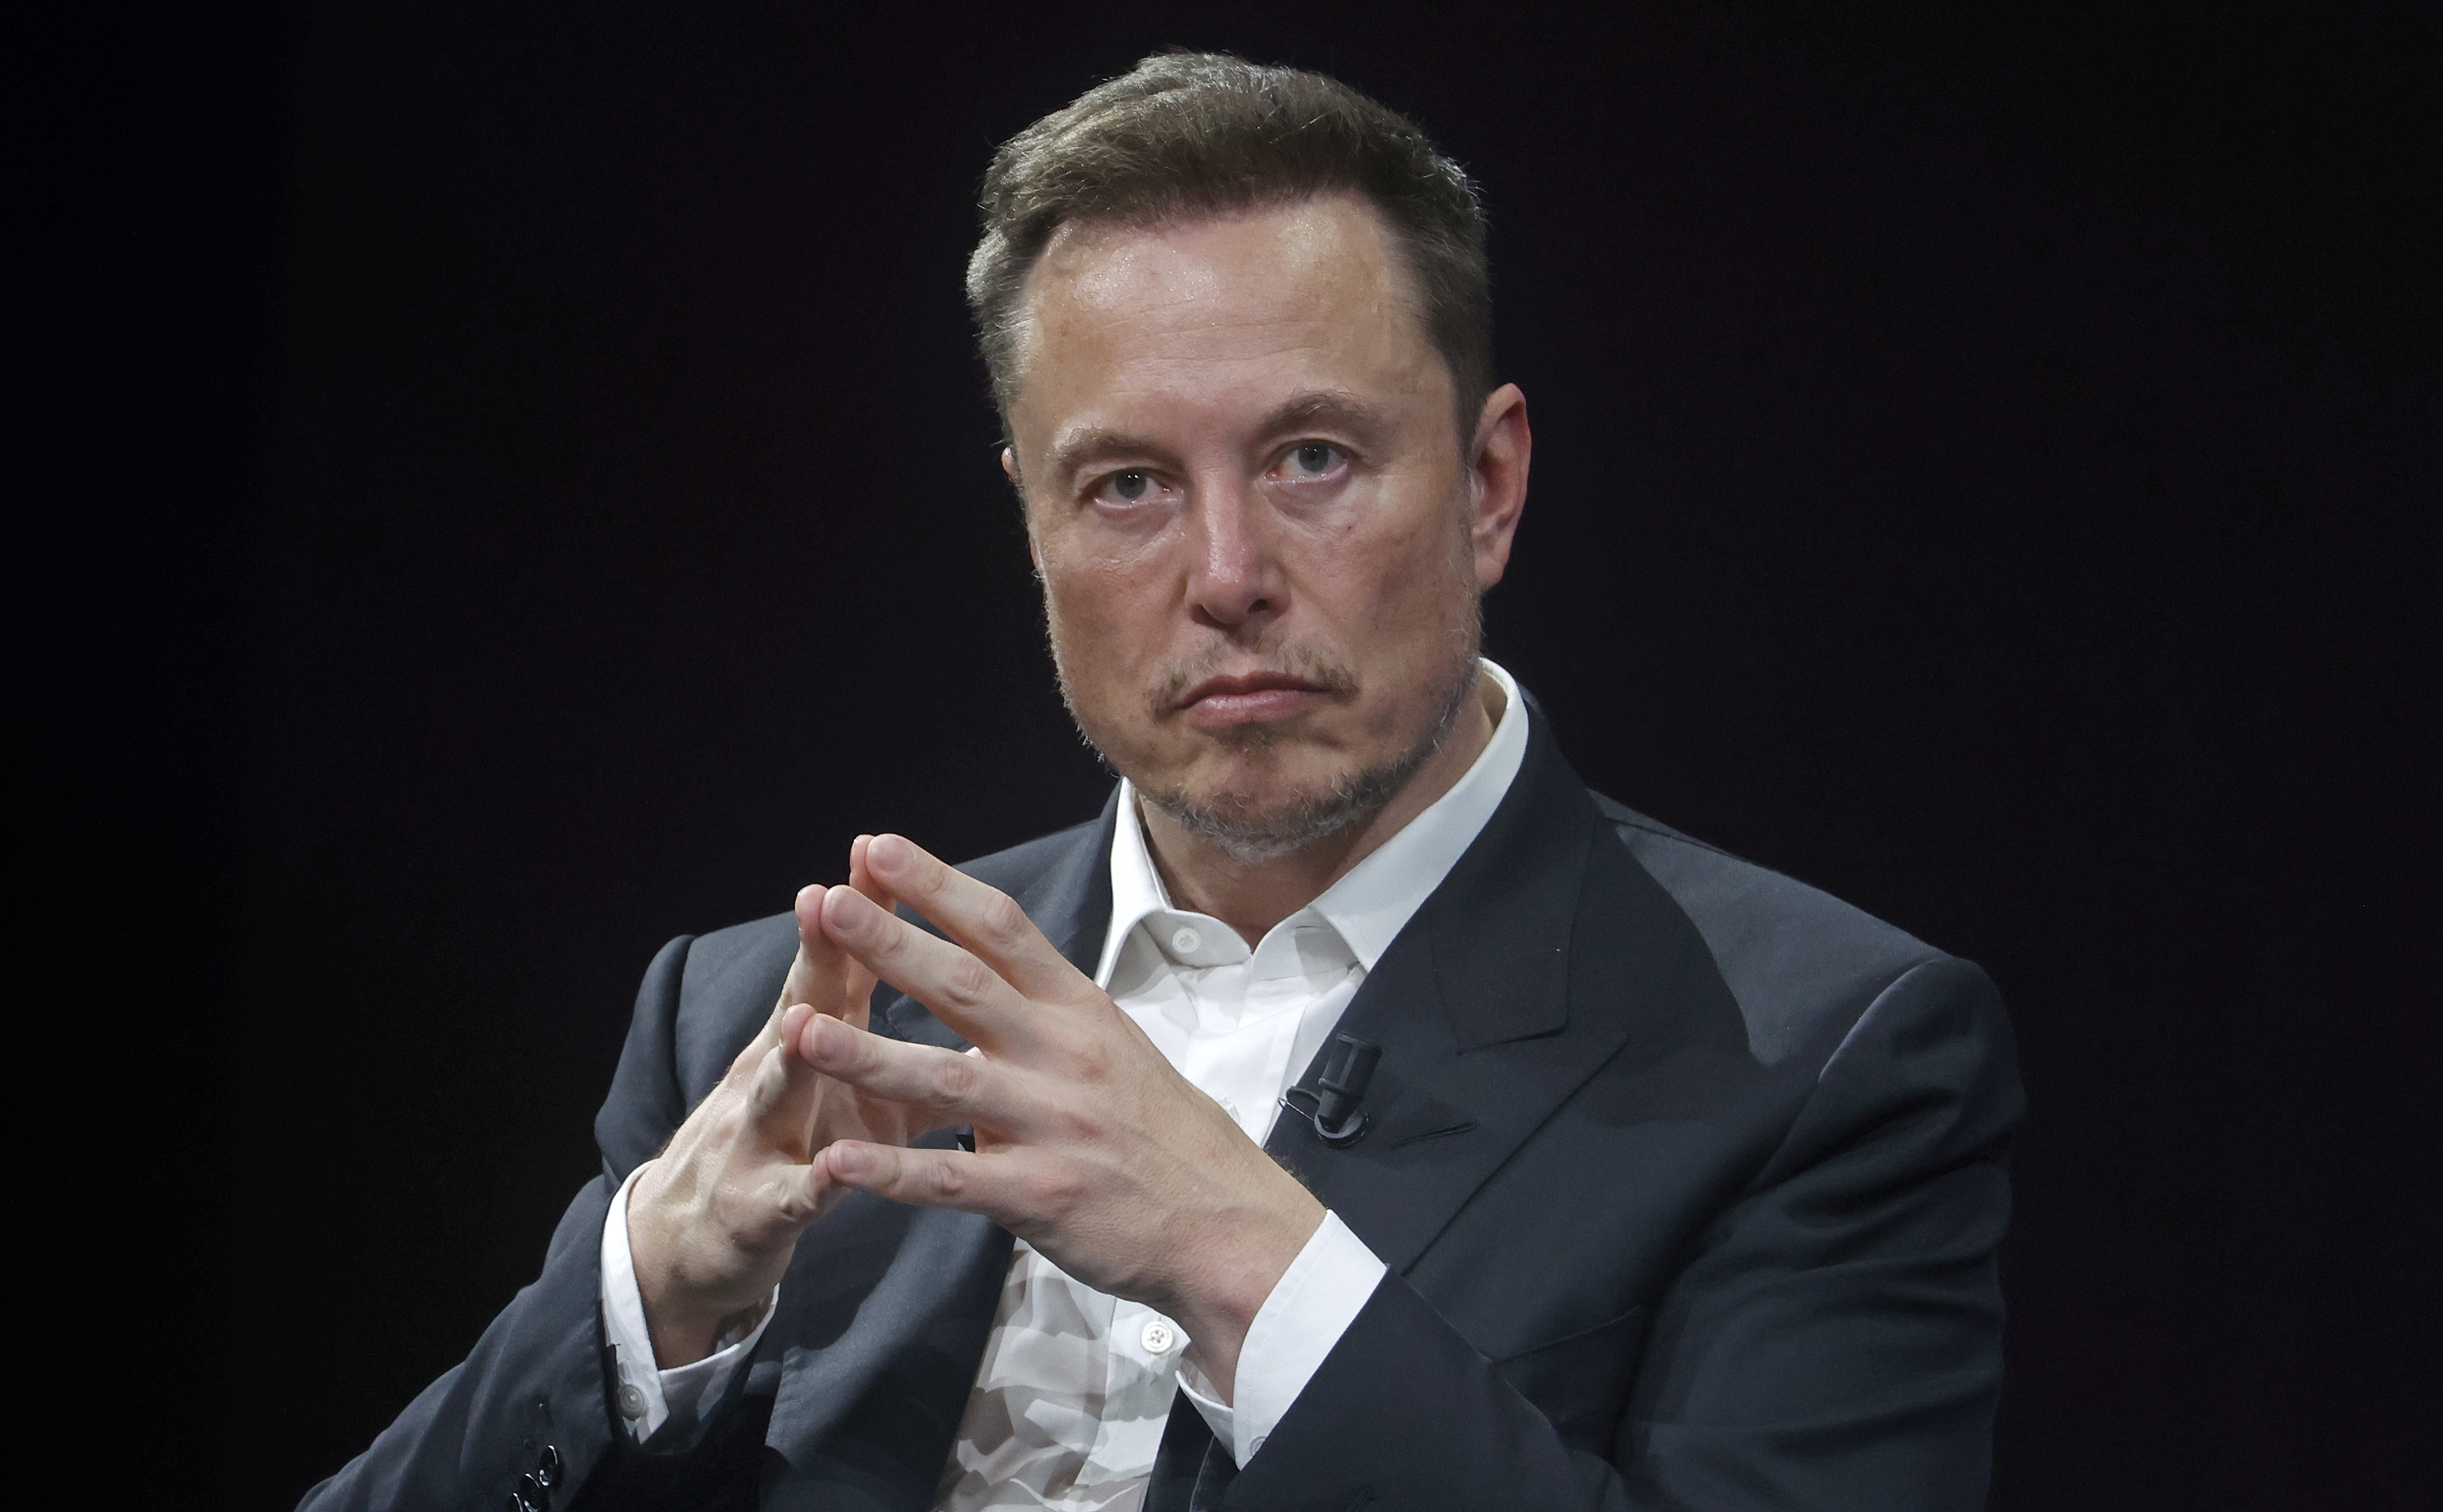 Elon Musk was handed the world's biggest ever pay packet earning himself a whopping $56billion